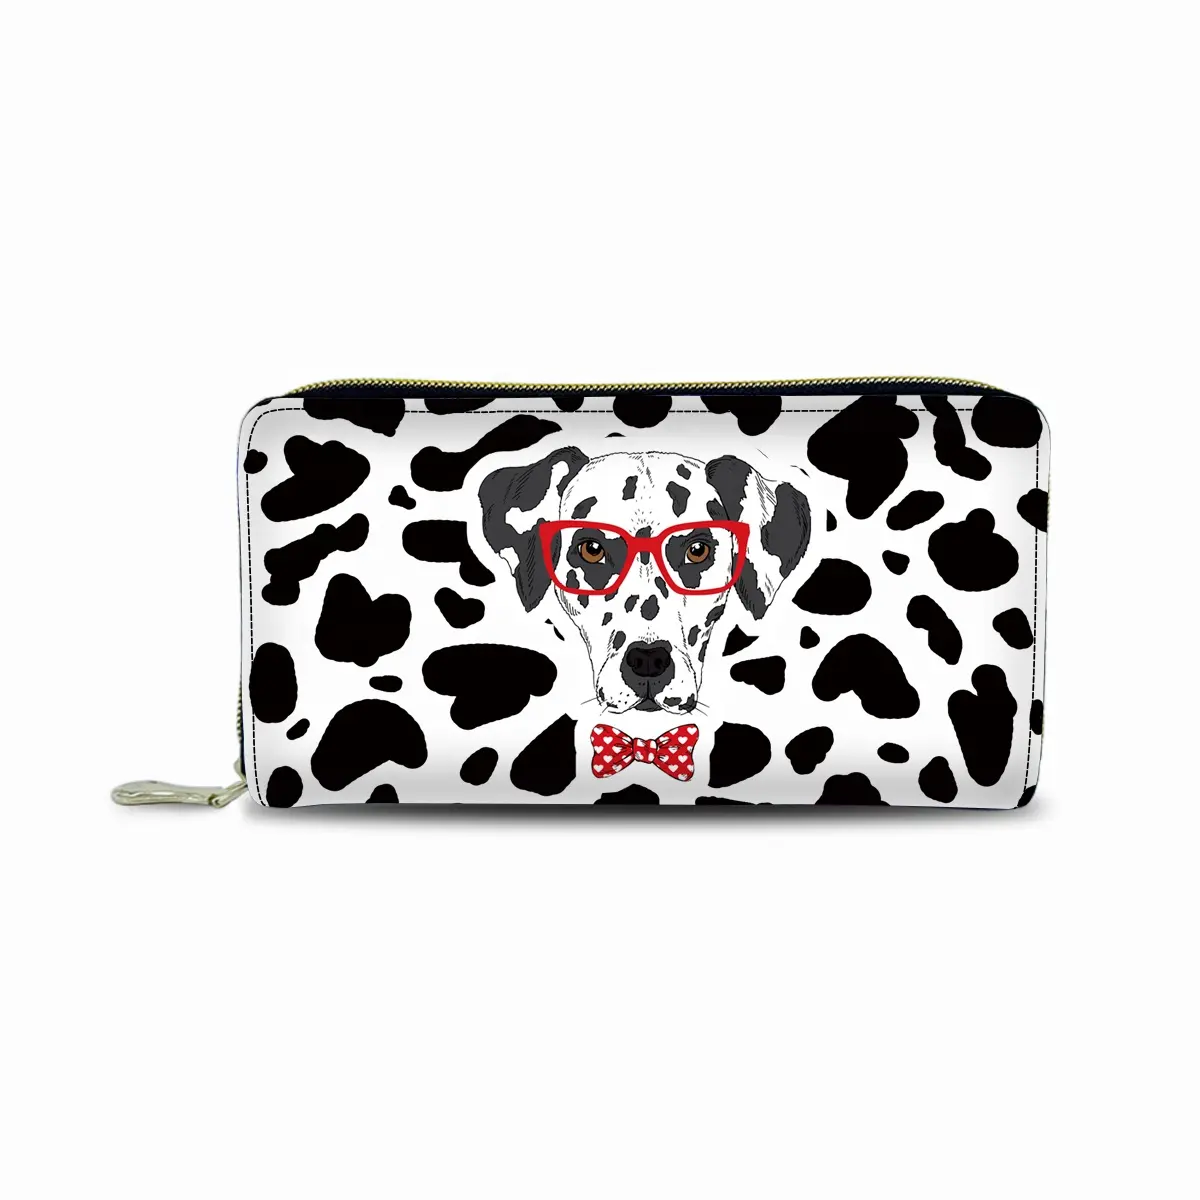 New Wholesale Purses And Handbags Women Wallets Leather Luxury Multi Compartment Blank Sublimation Wallet